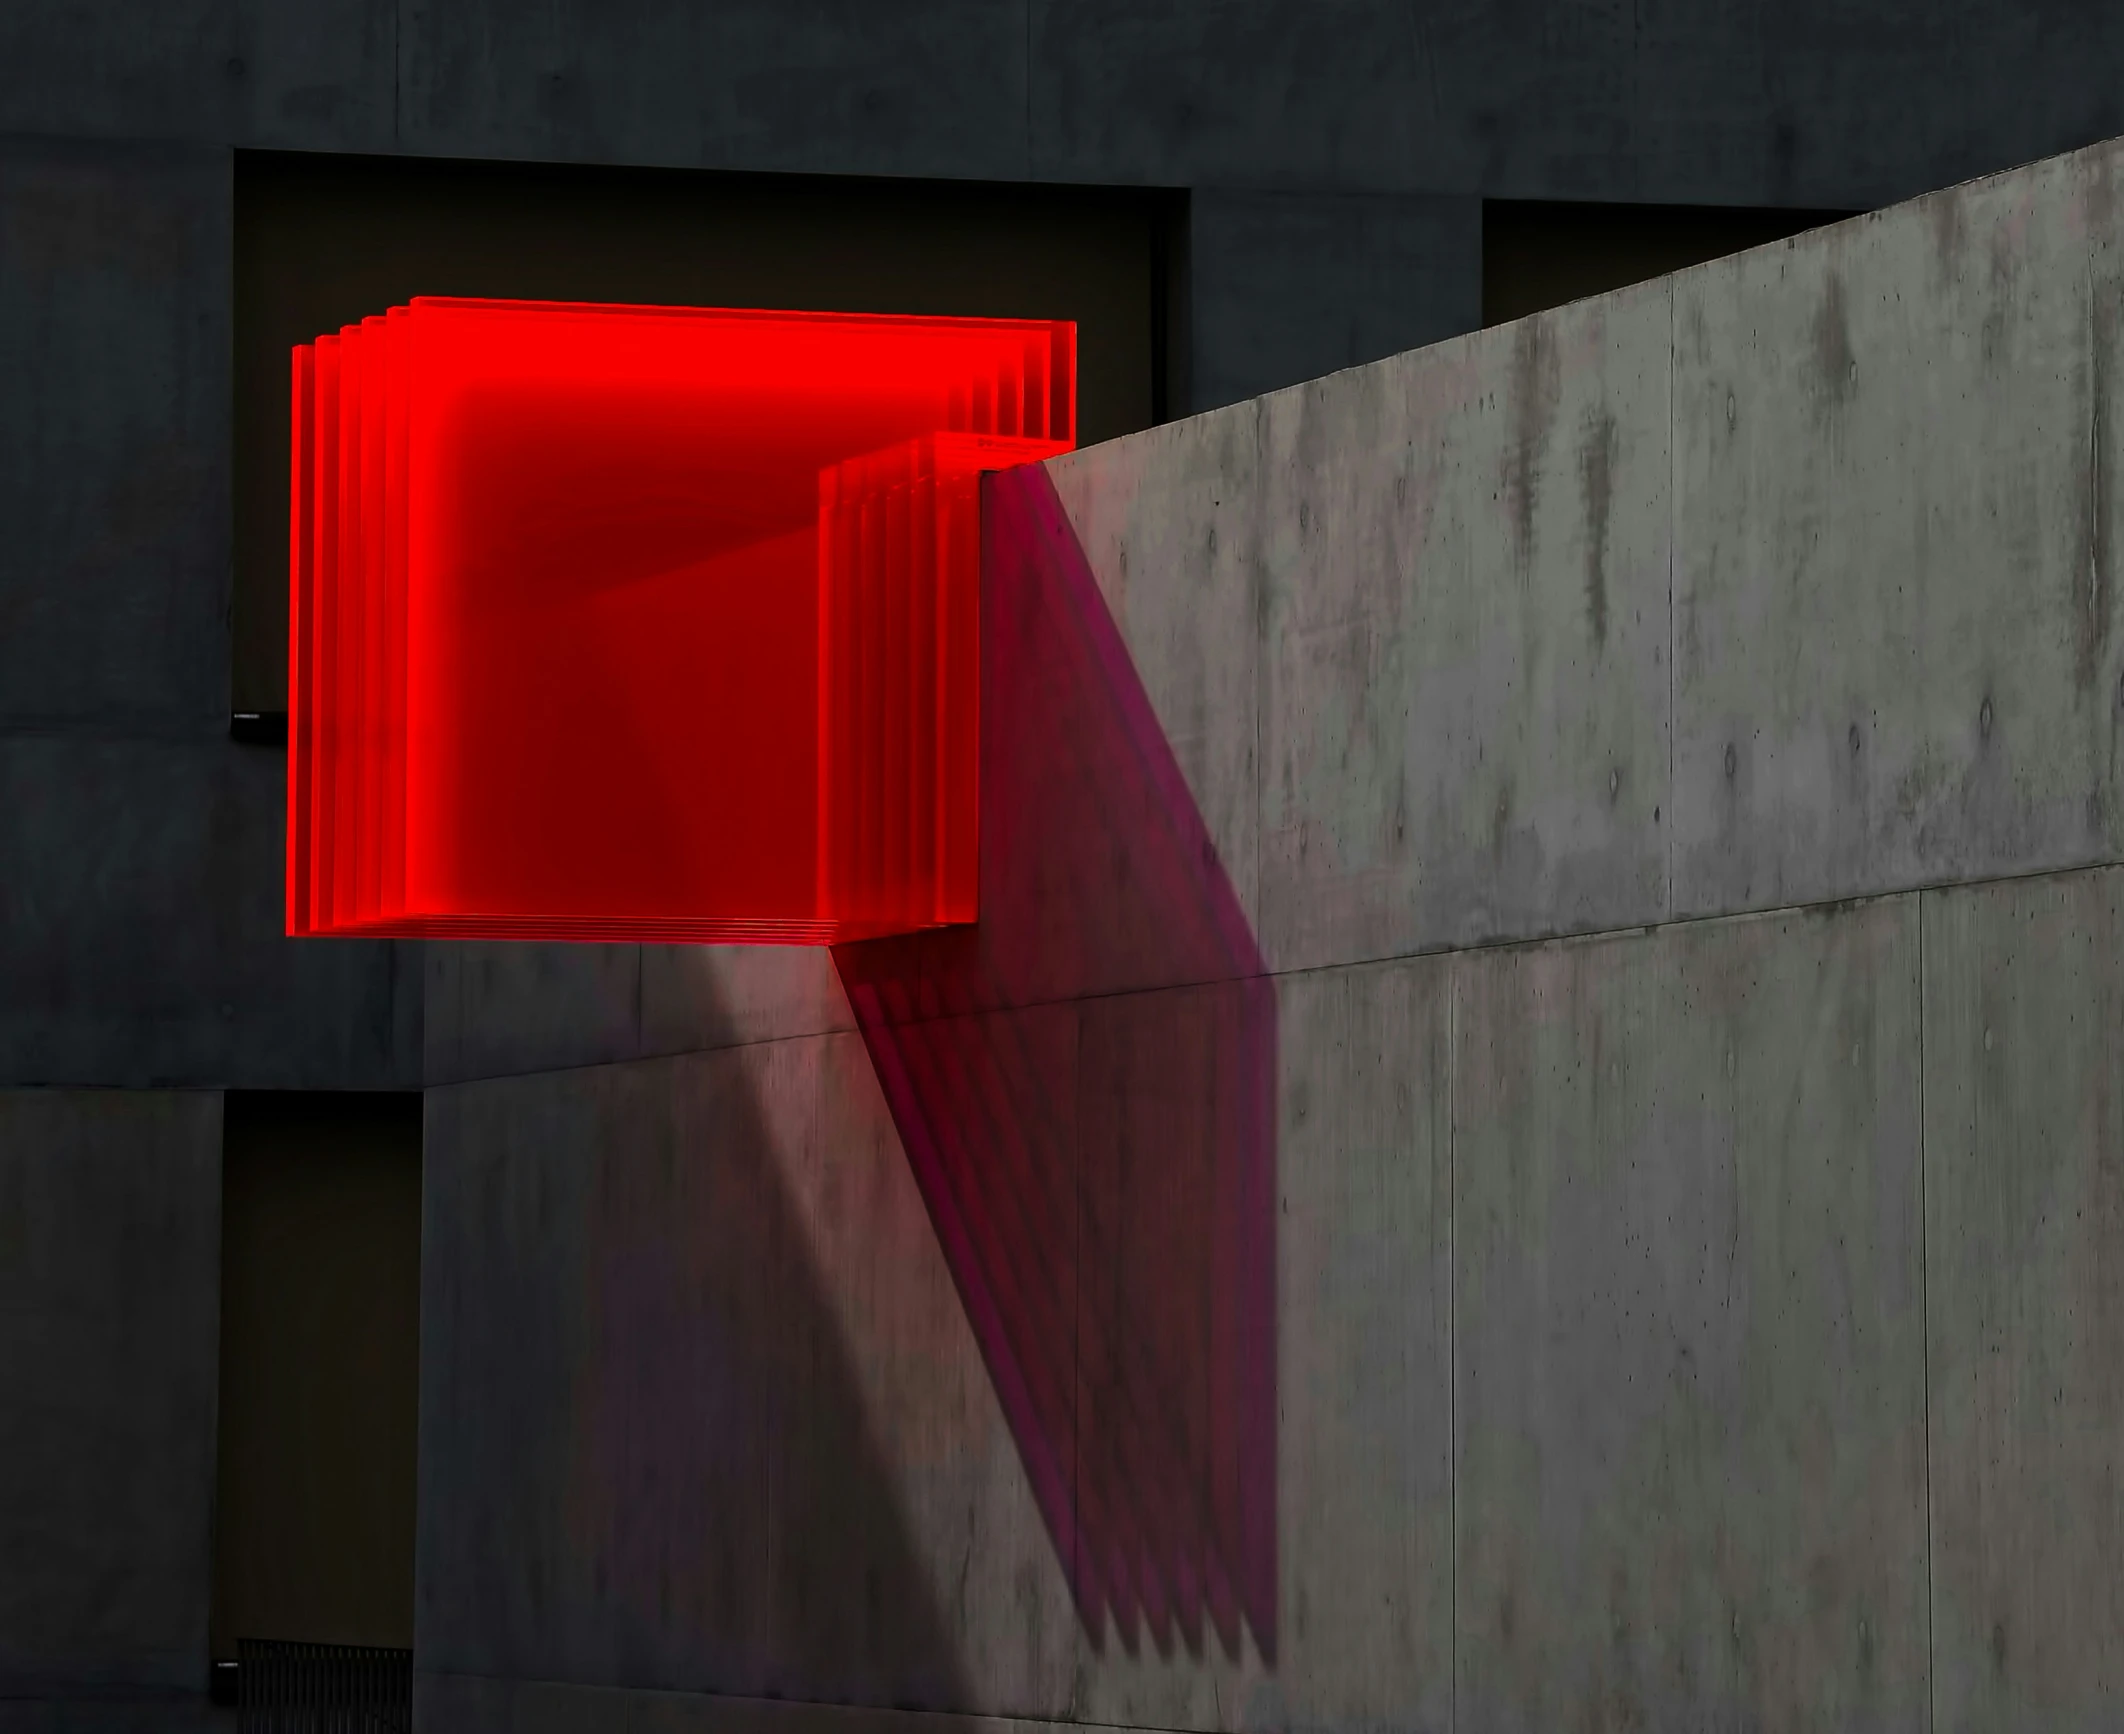 the red light is coming out of the concrete wall